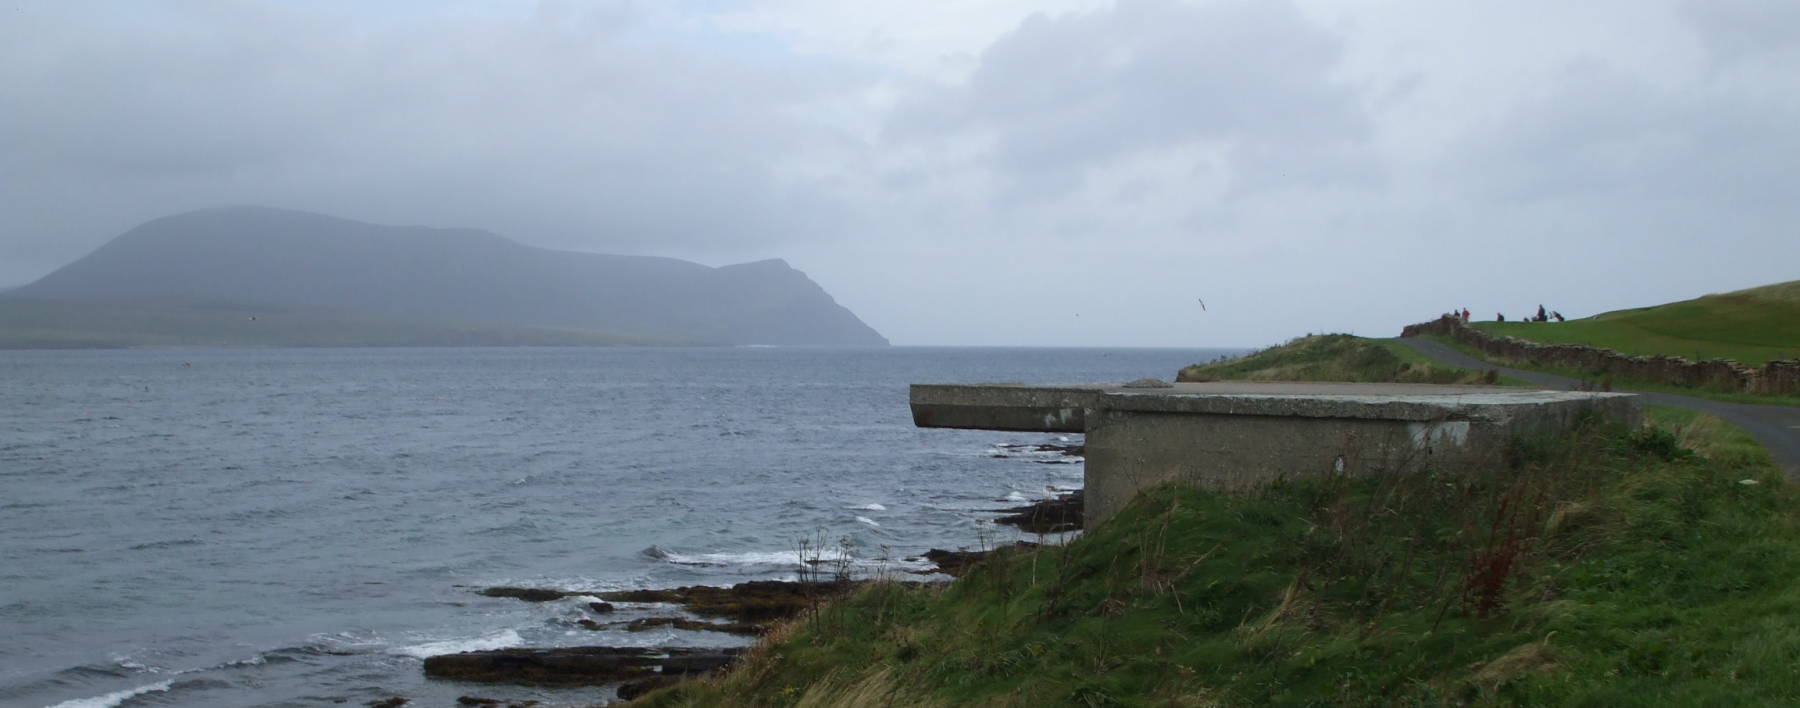 World War II defensive bunker on Mainland, Orkney, with Hoy visible across Hoy Sound.